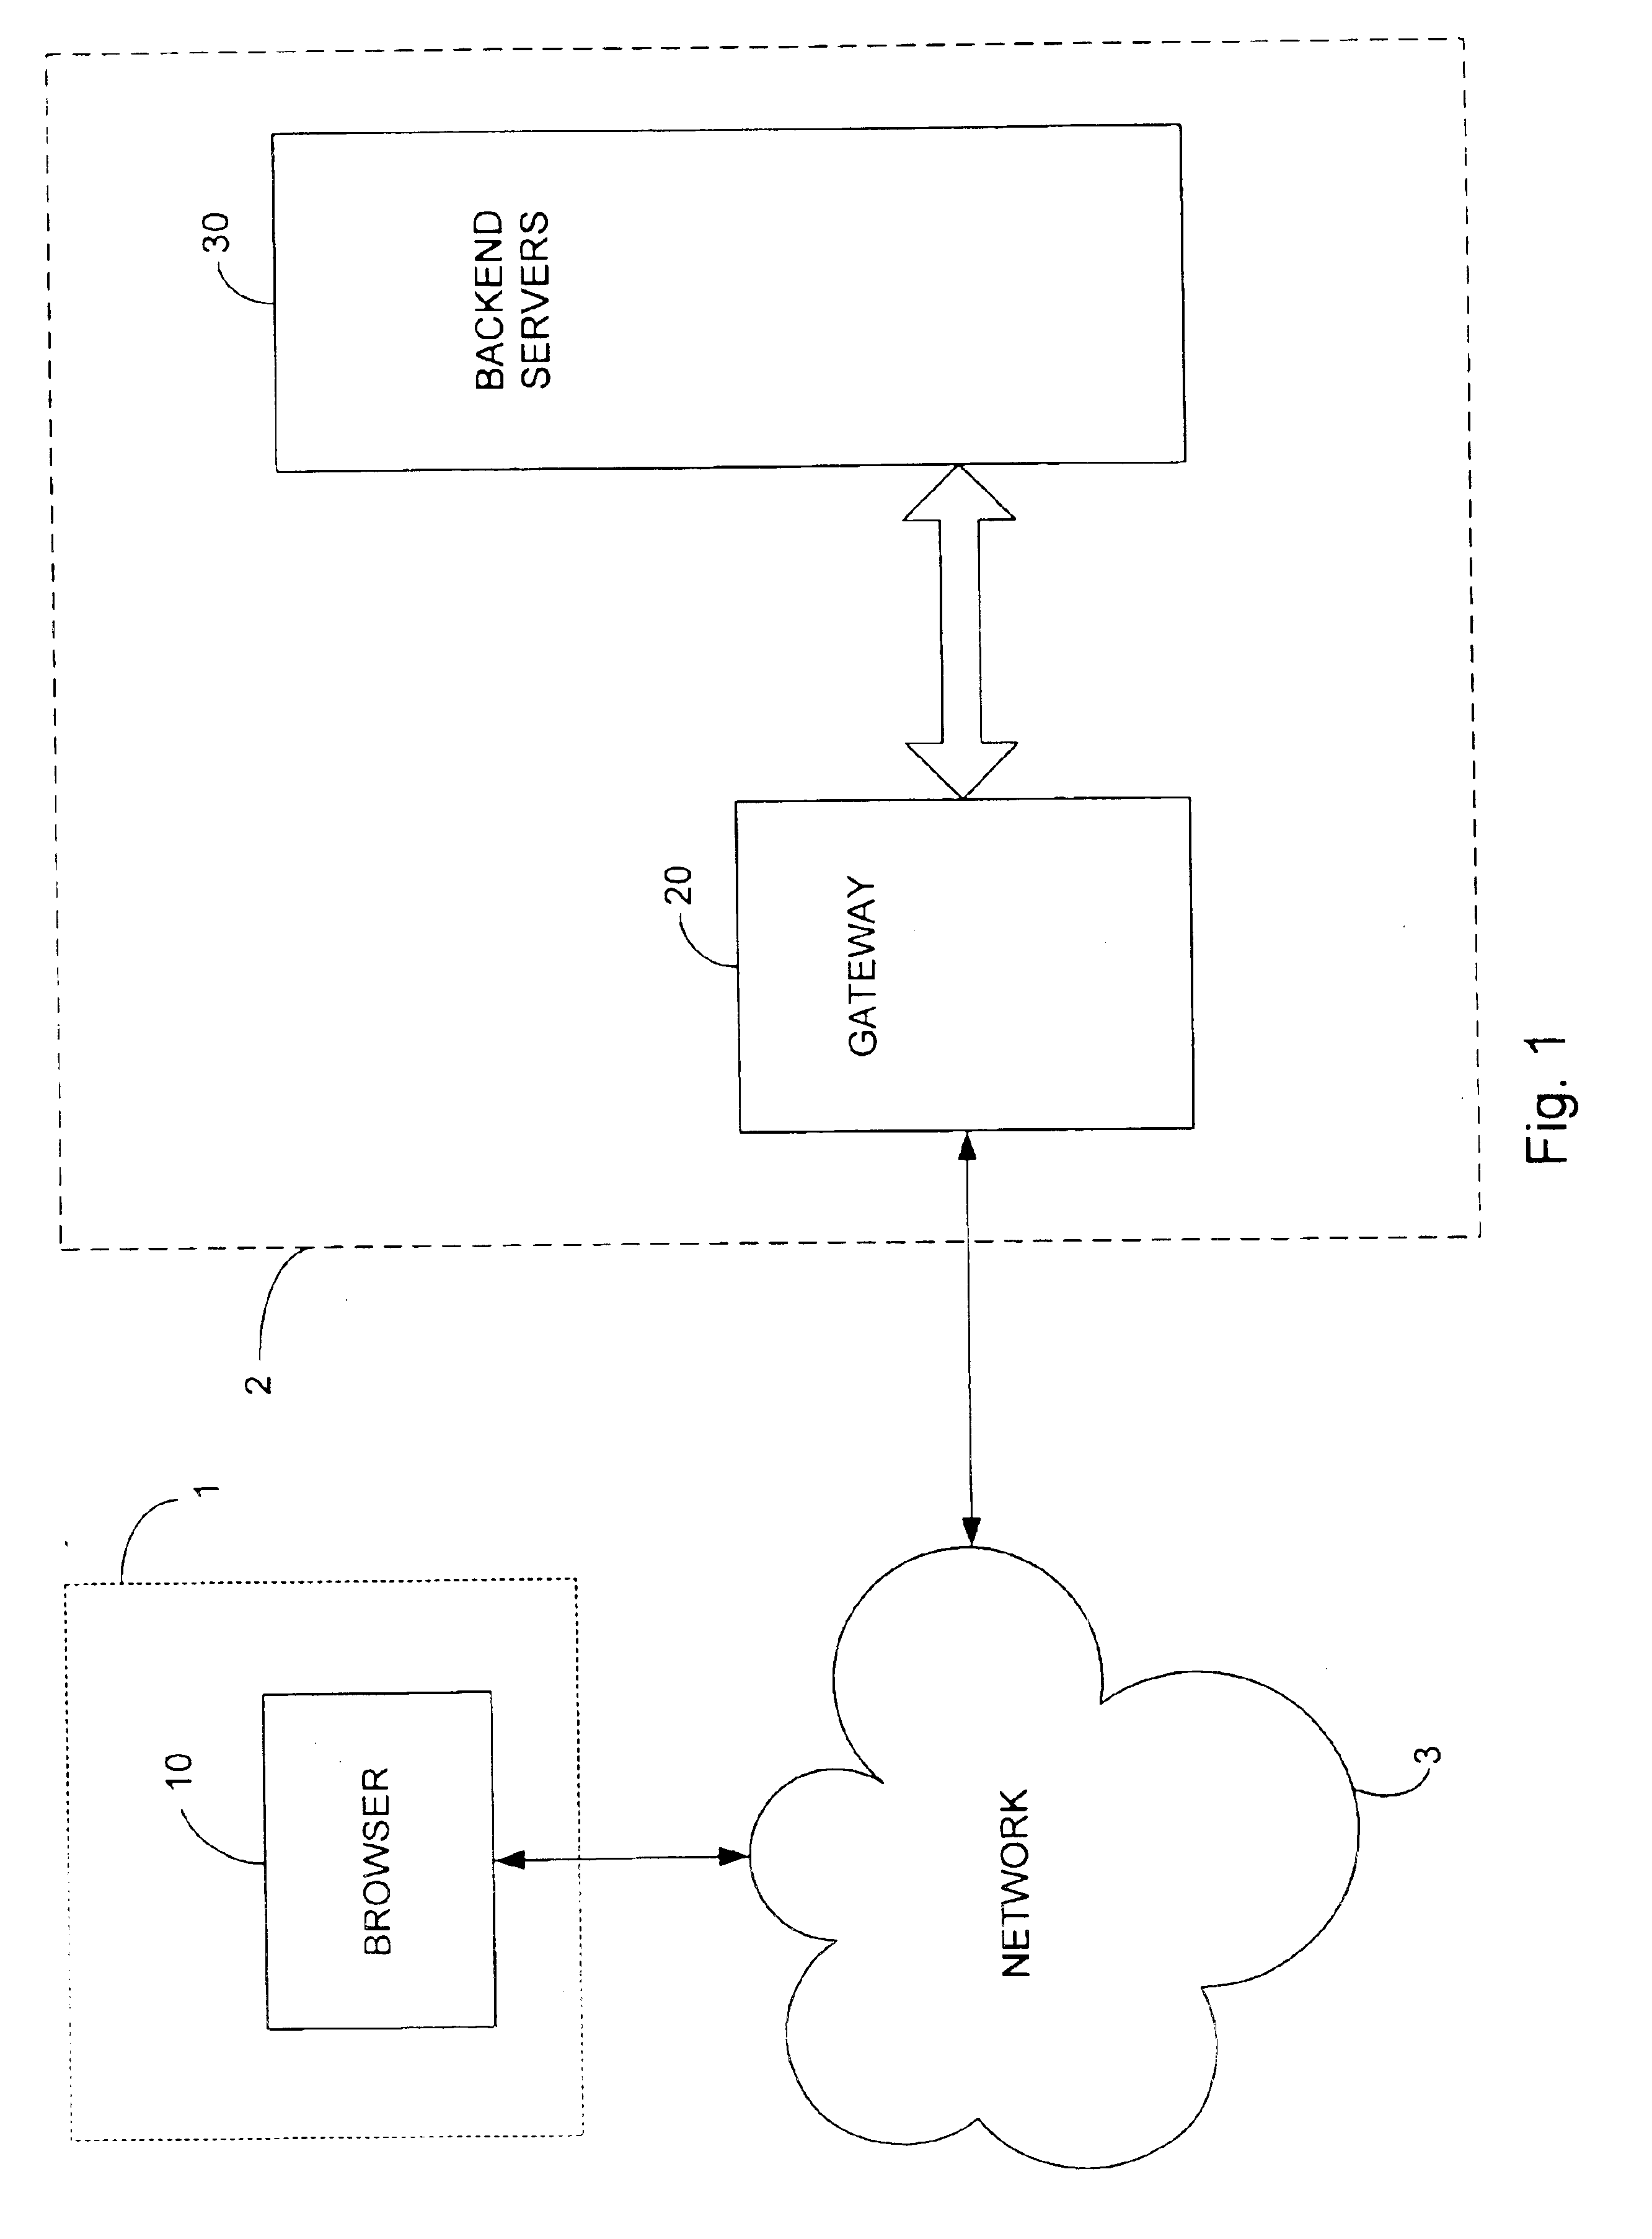 System and method for generating reports in a telecommunication system